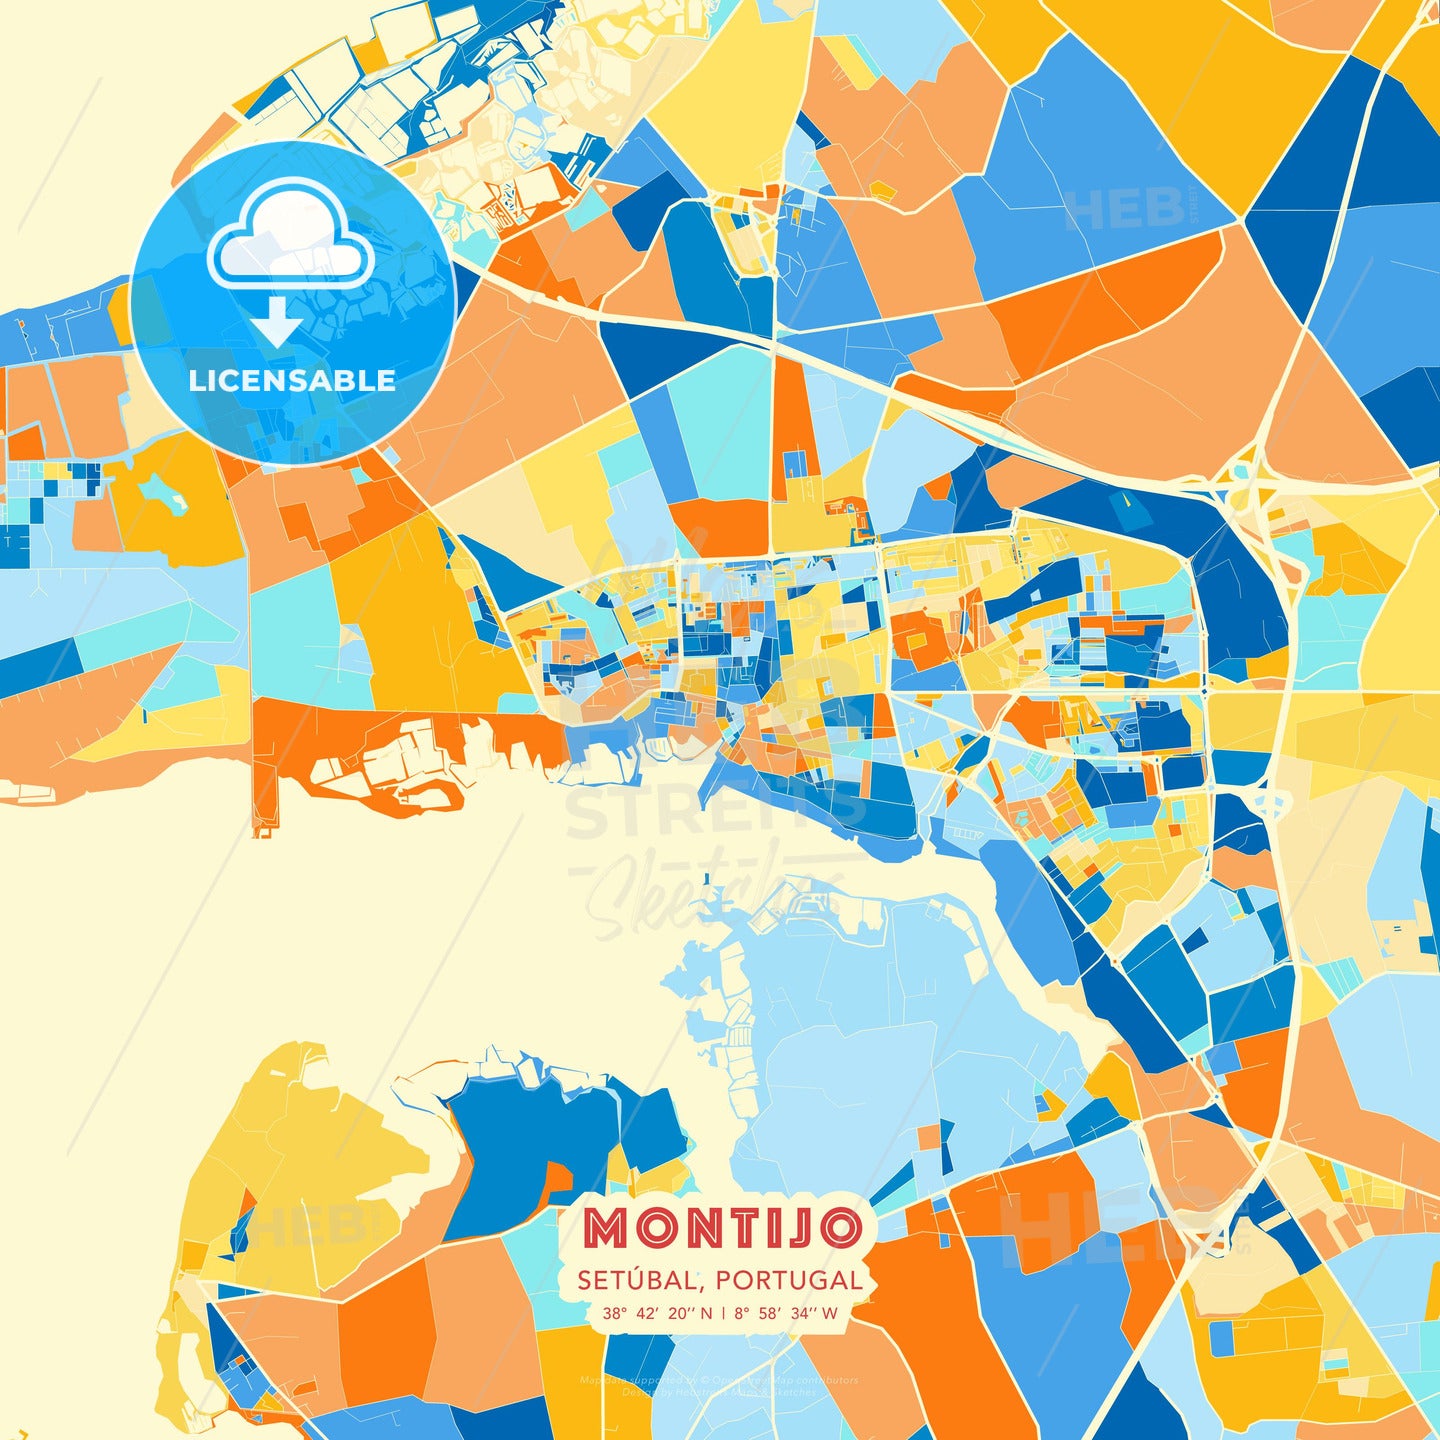 Montijo, Setúbal, Portugal, map - HEBSTREITS Sketches